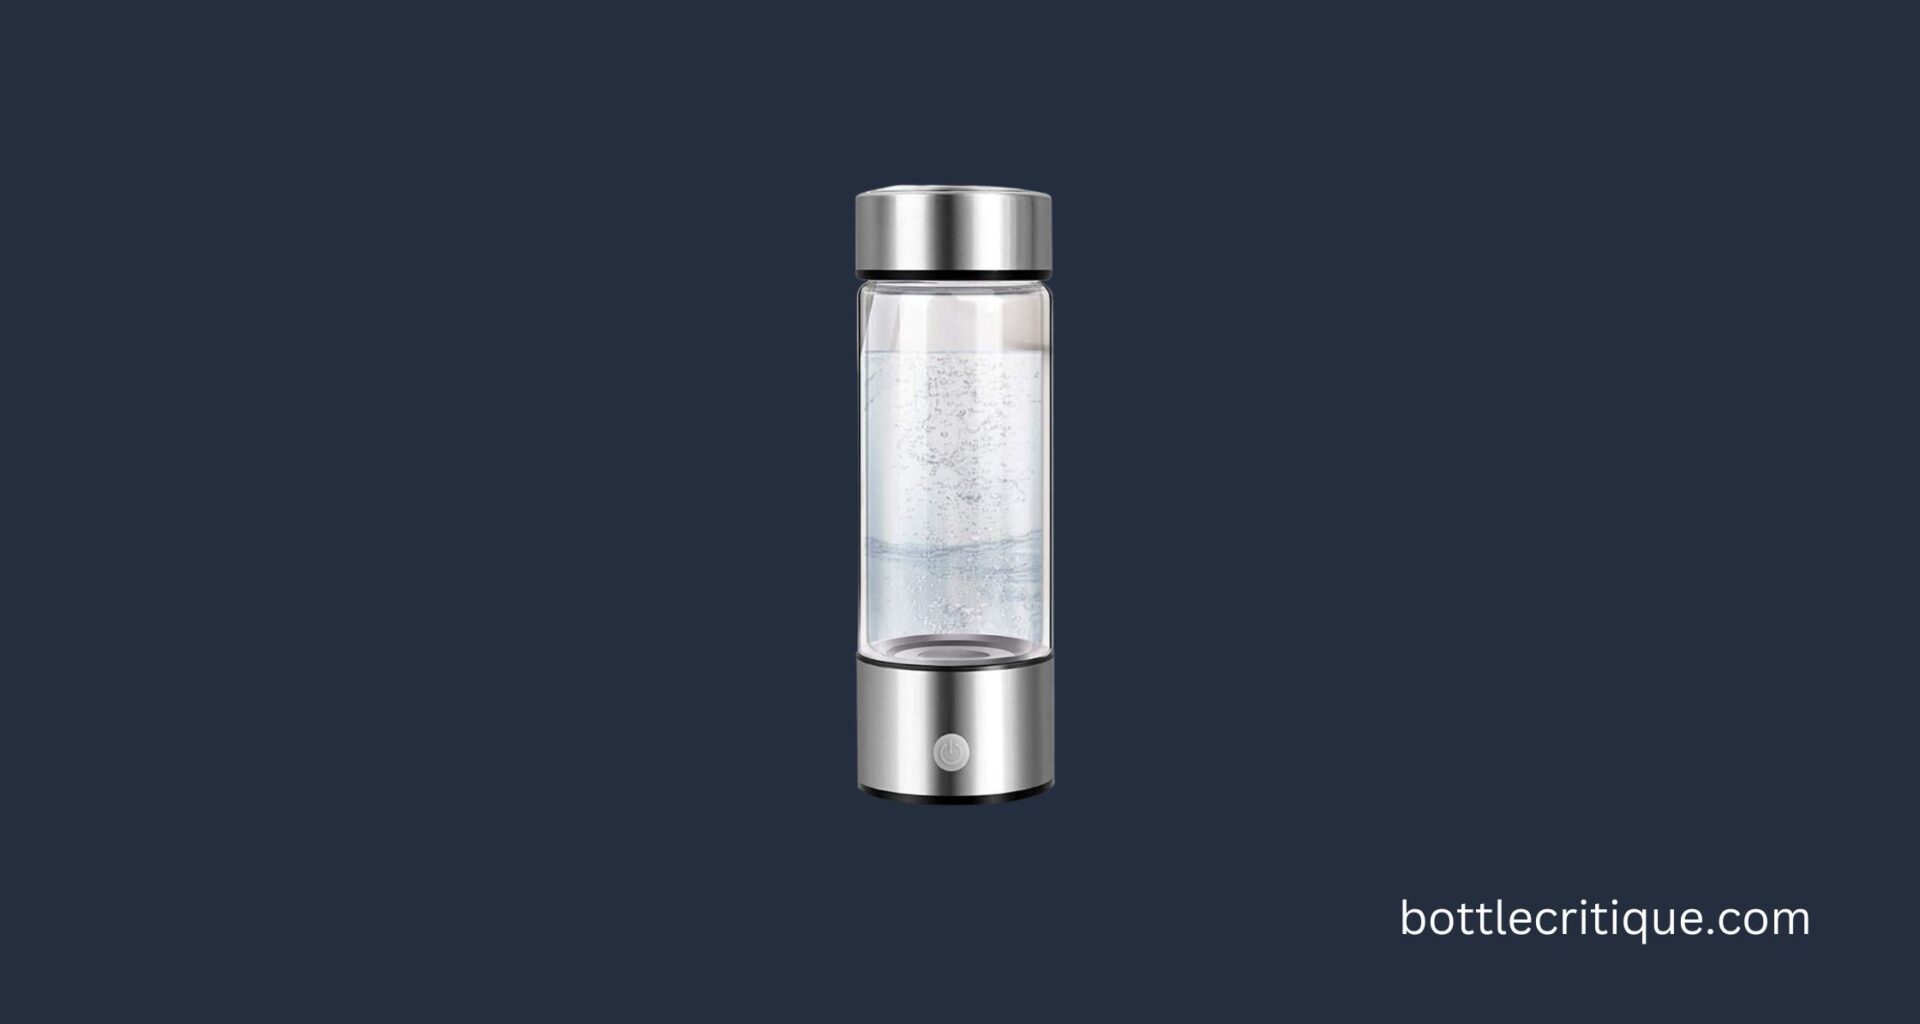 How to Use Hydrogen Water Bottle?